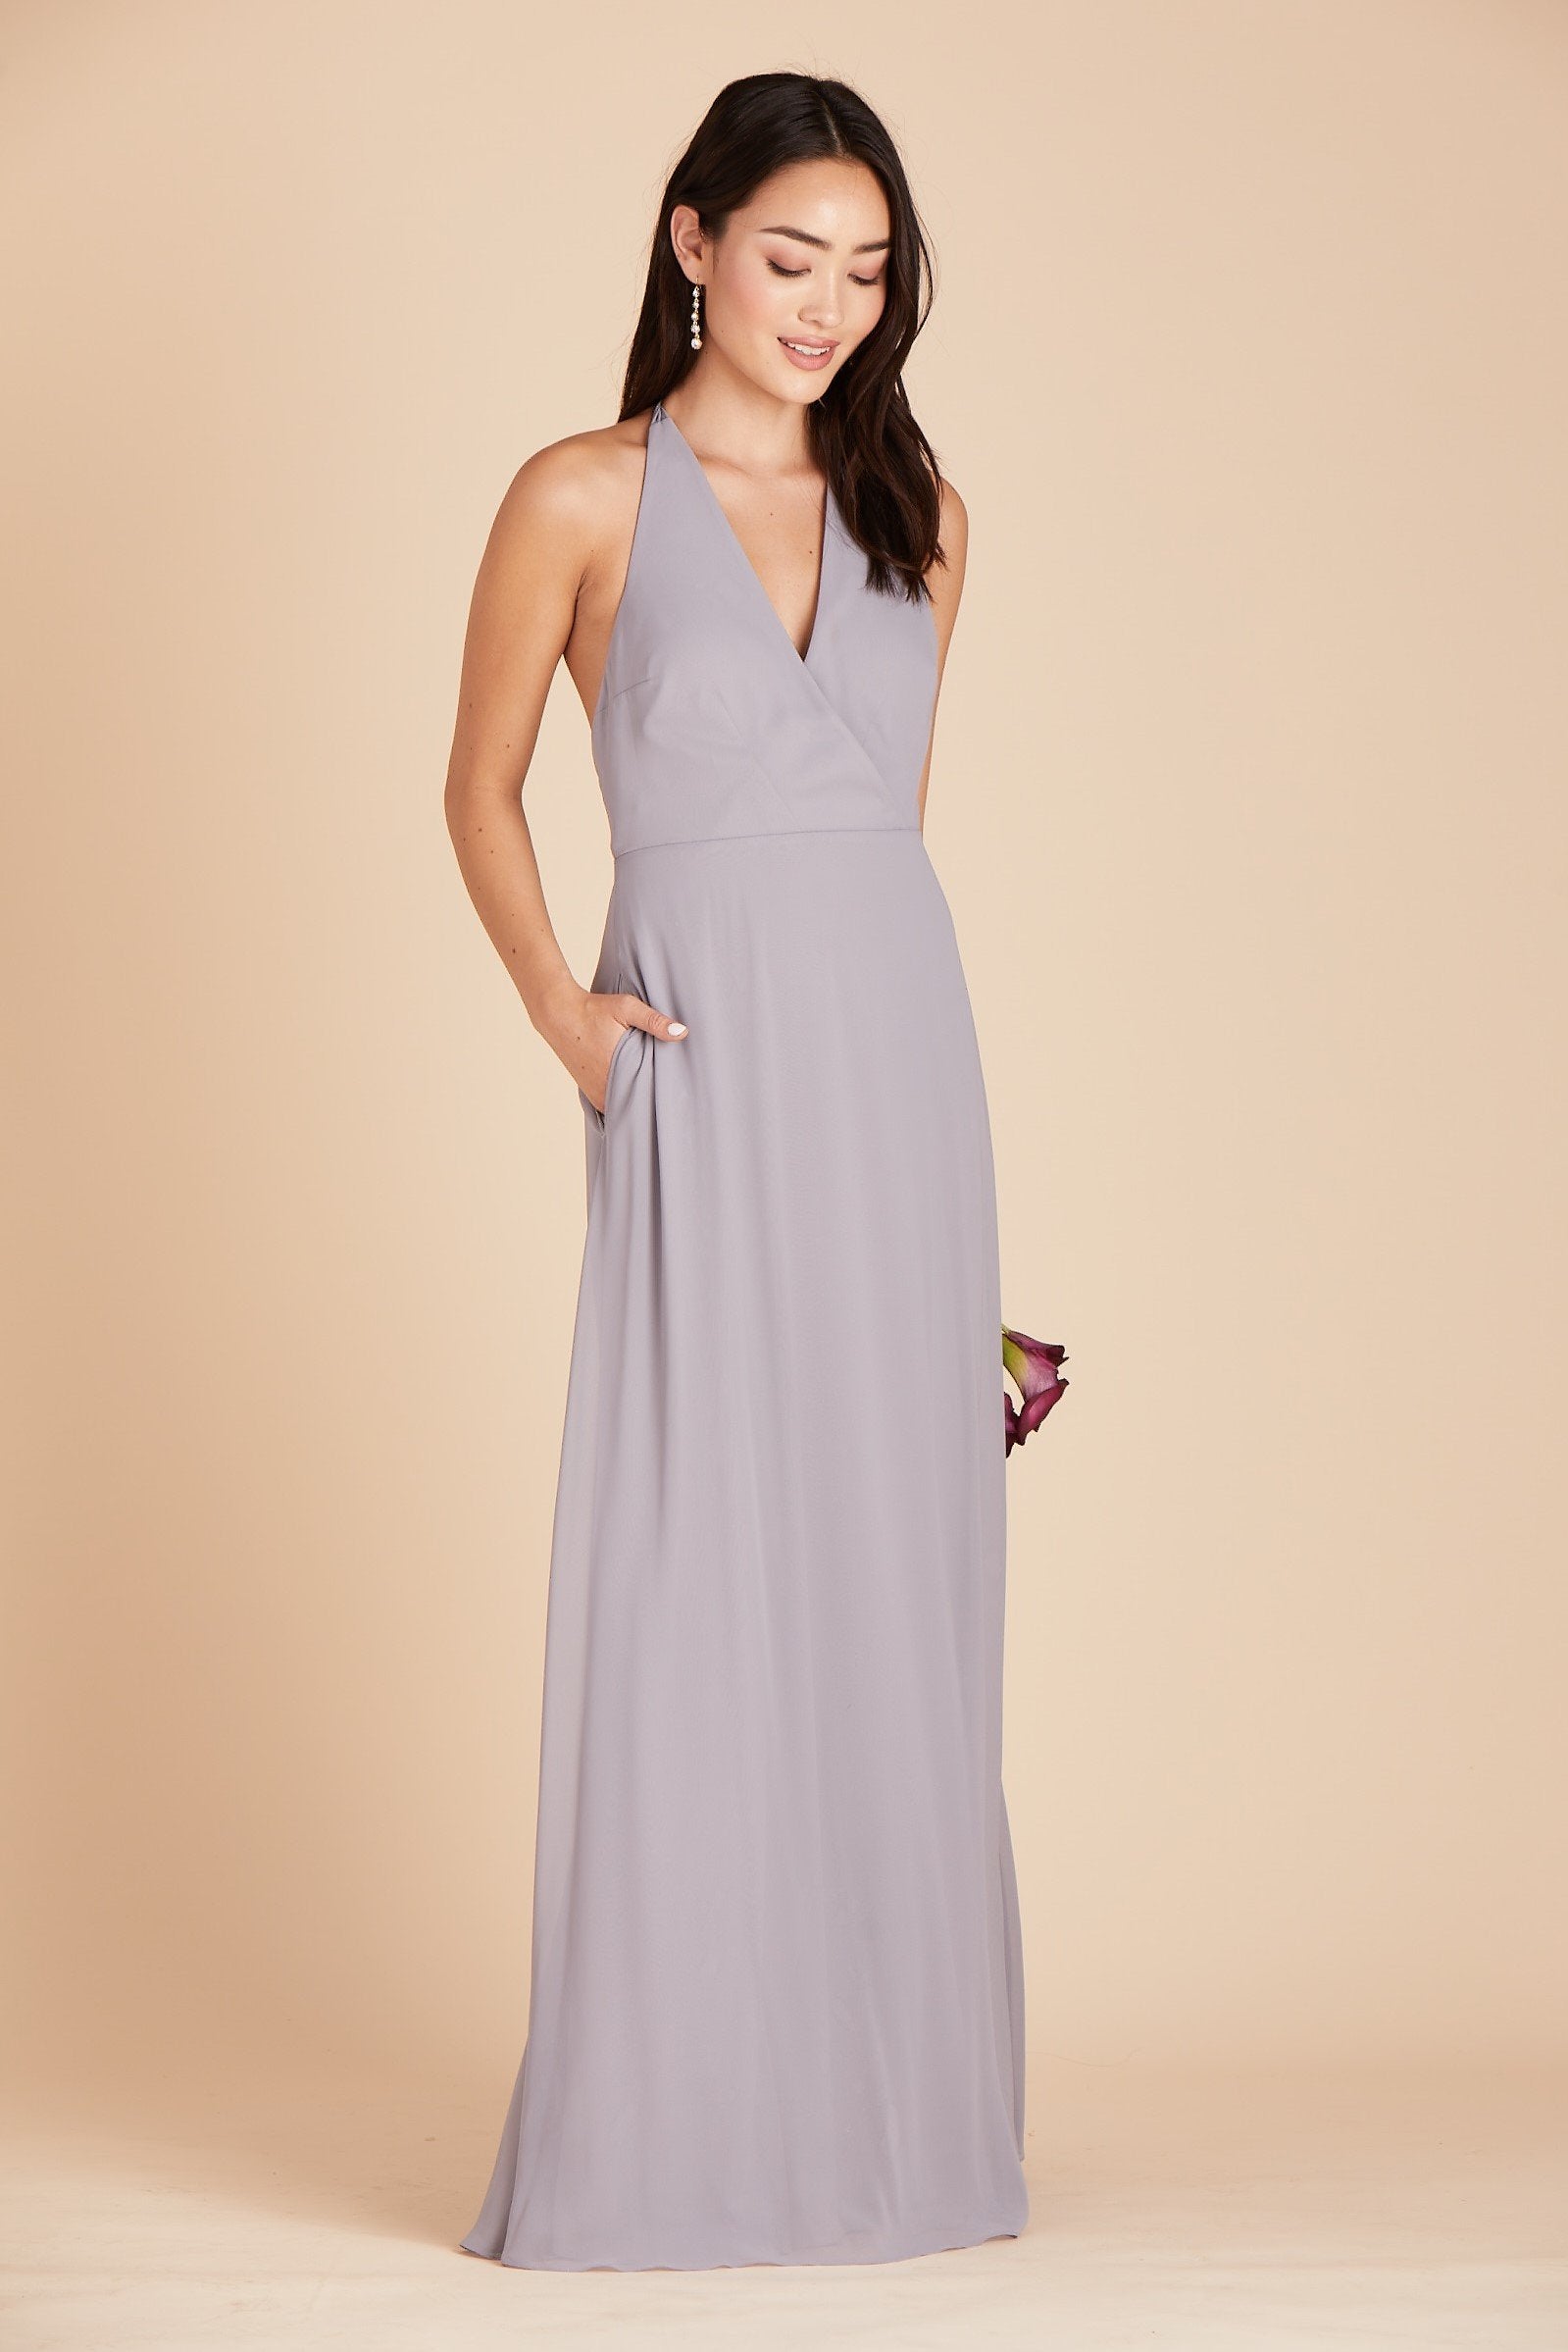 Moni convertible bridesmaids dress in silver chiffon by Birdy Grey, front view with hand in pocket